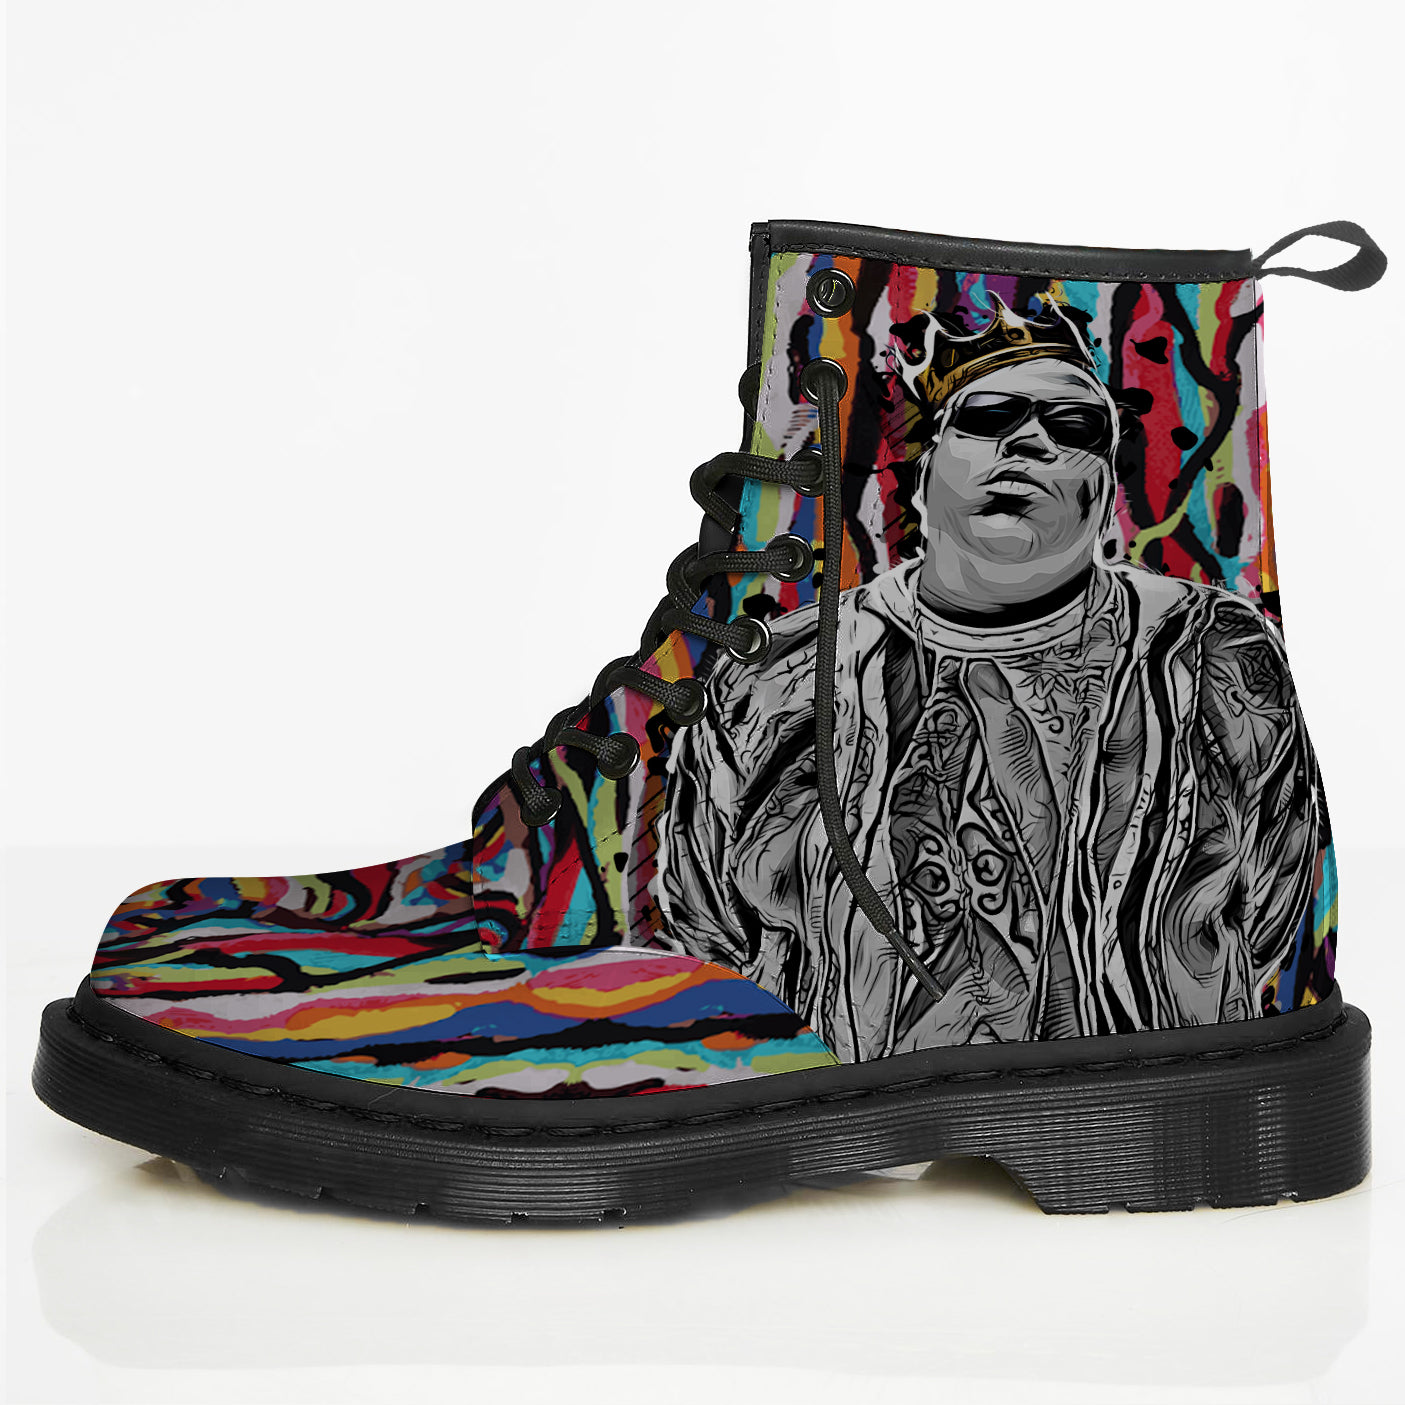 Notorious B.I.G. Boots